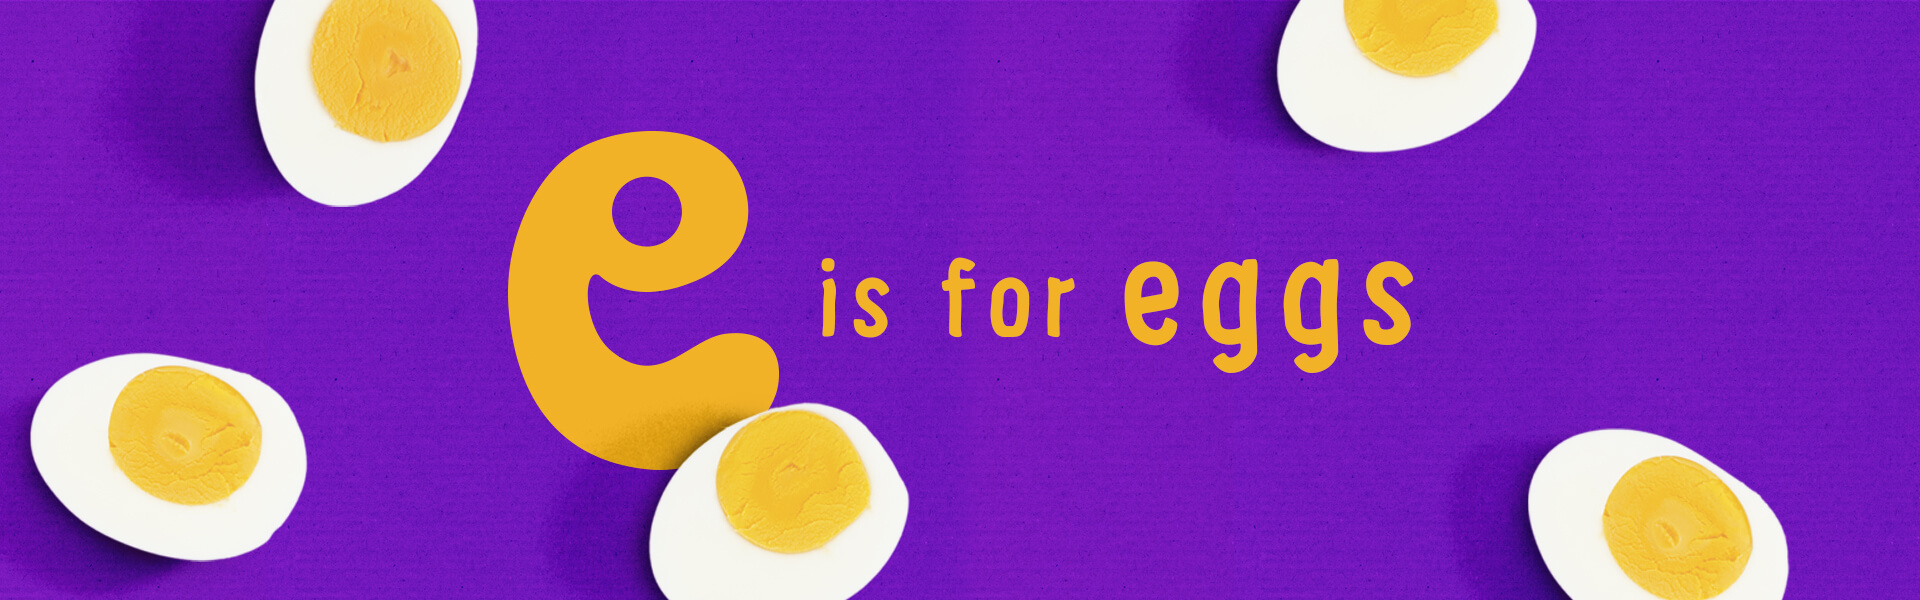 Organix e is for eggs